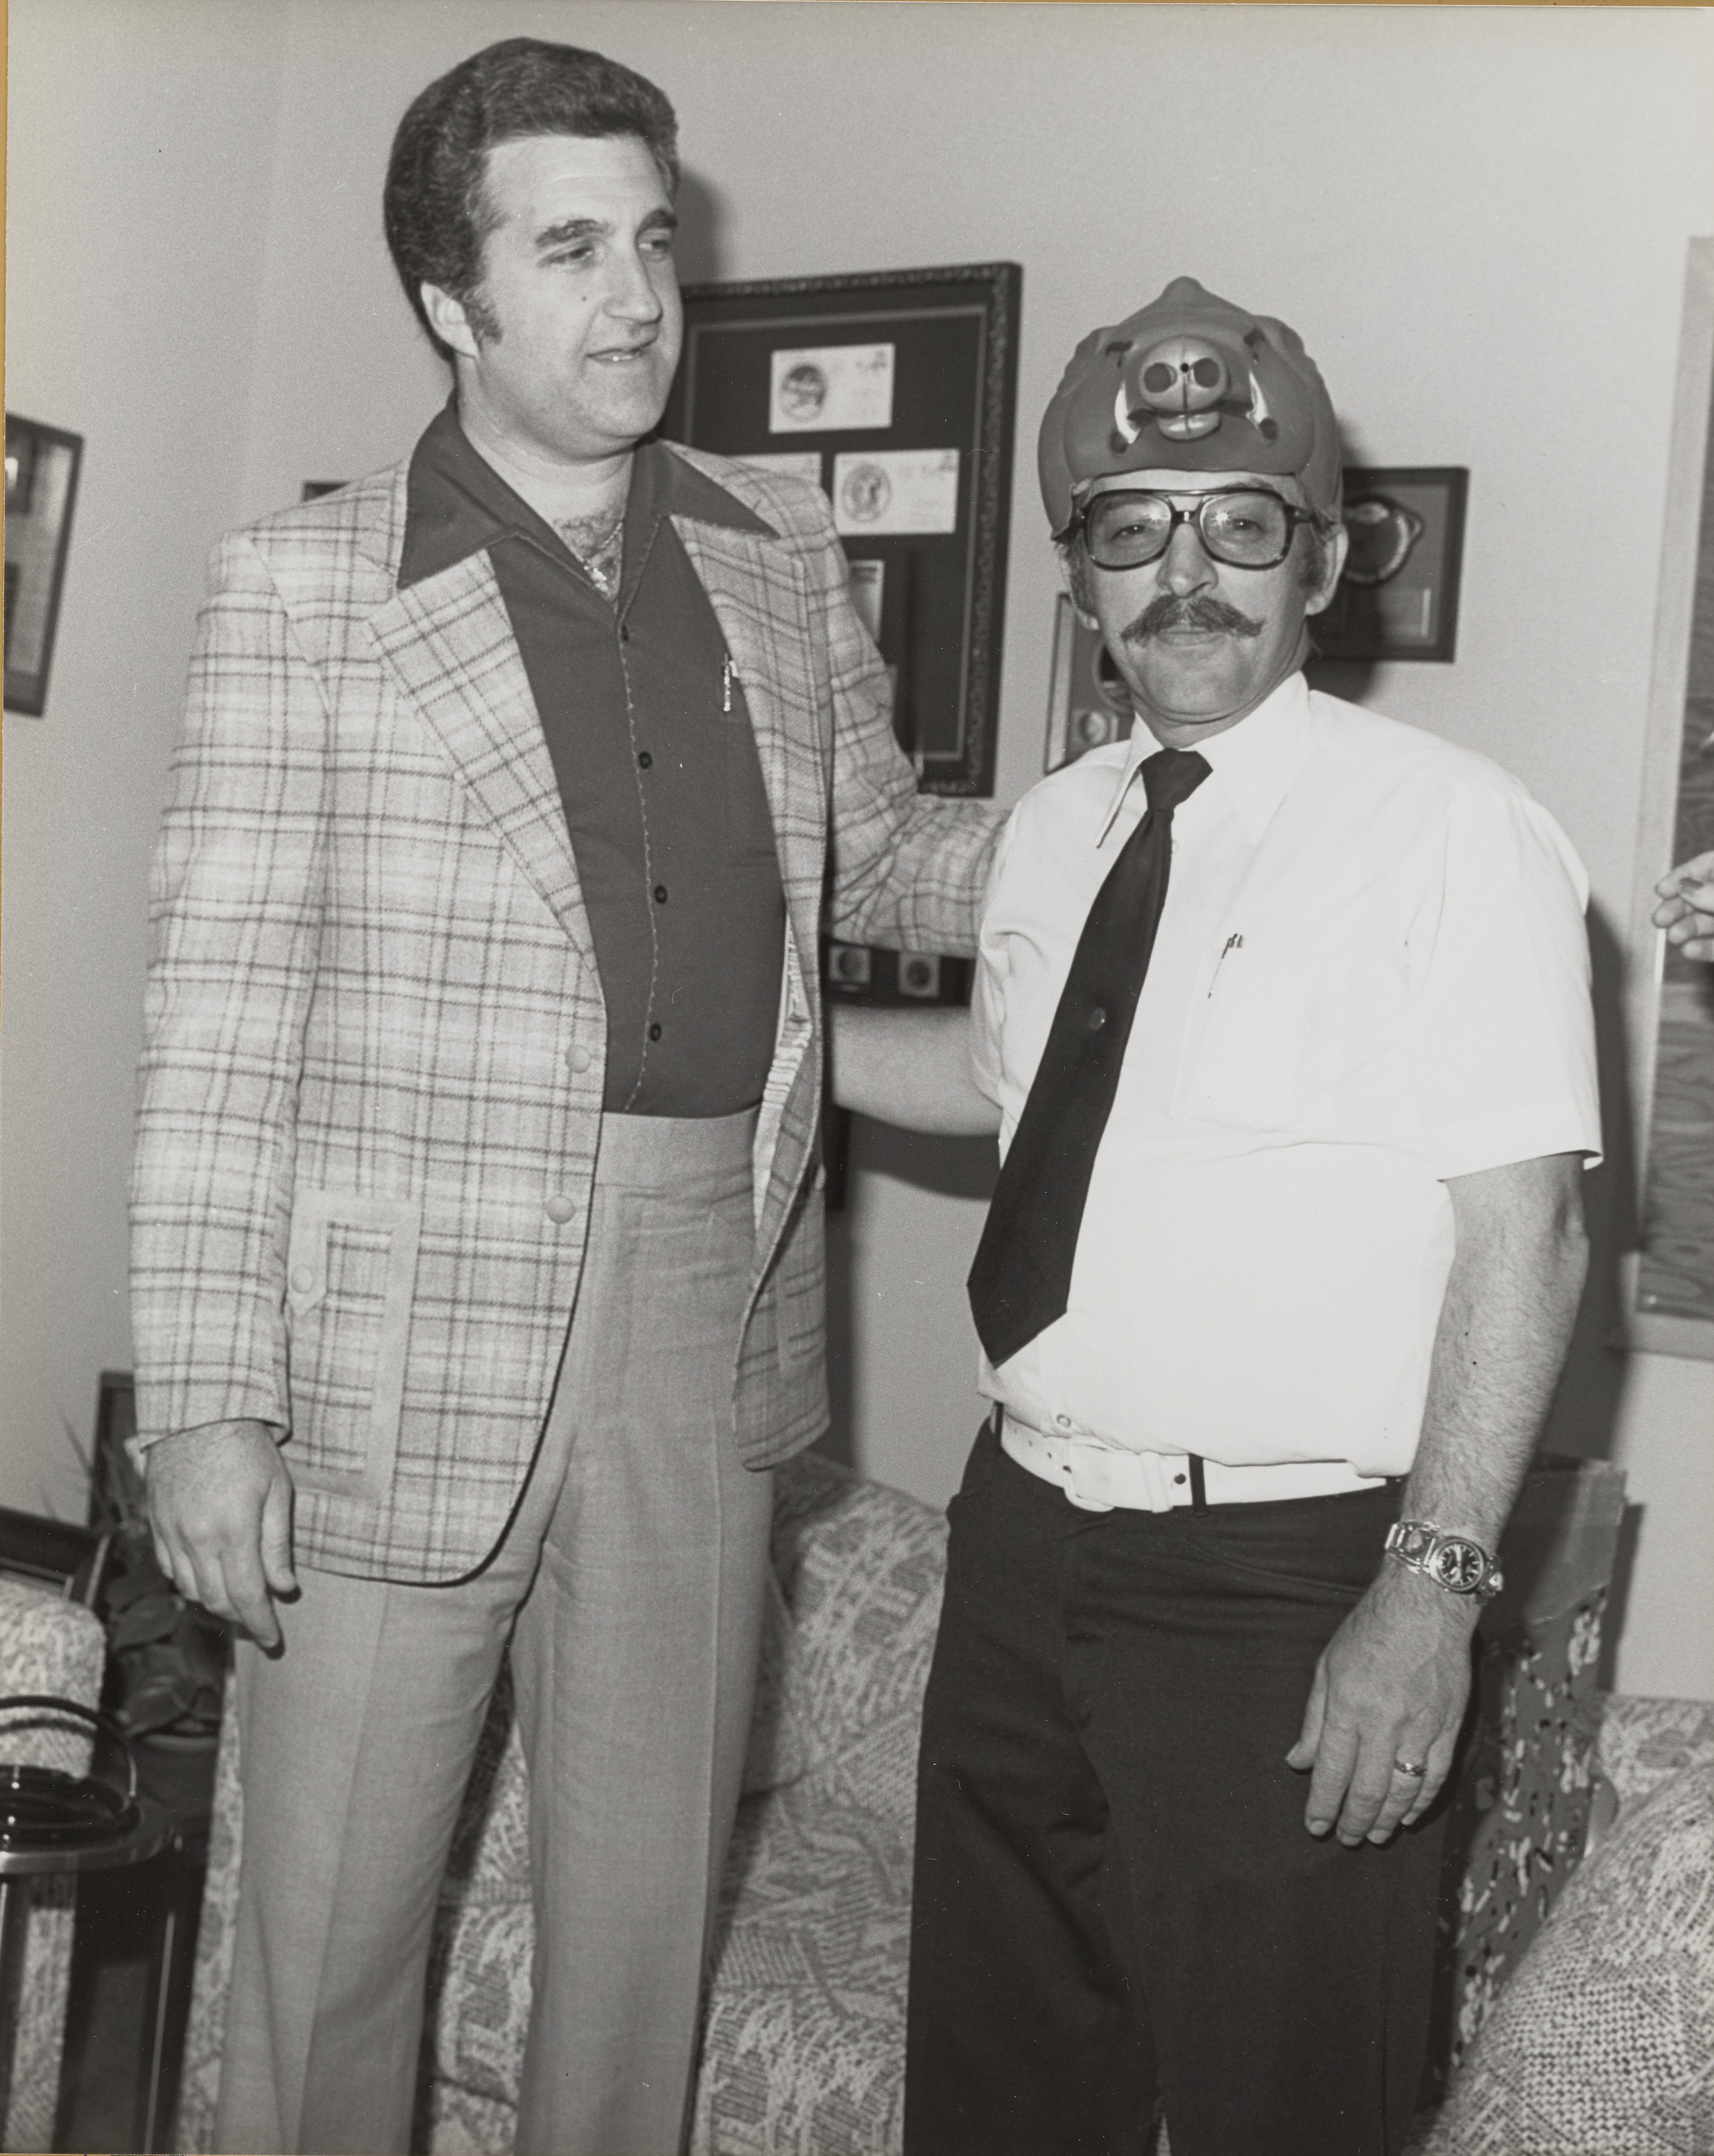 Photograph of Ron Lurie with a man wearing a pig hat